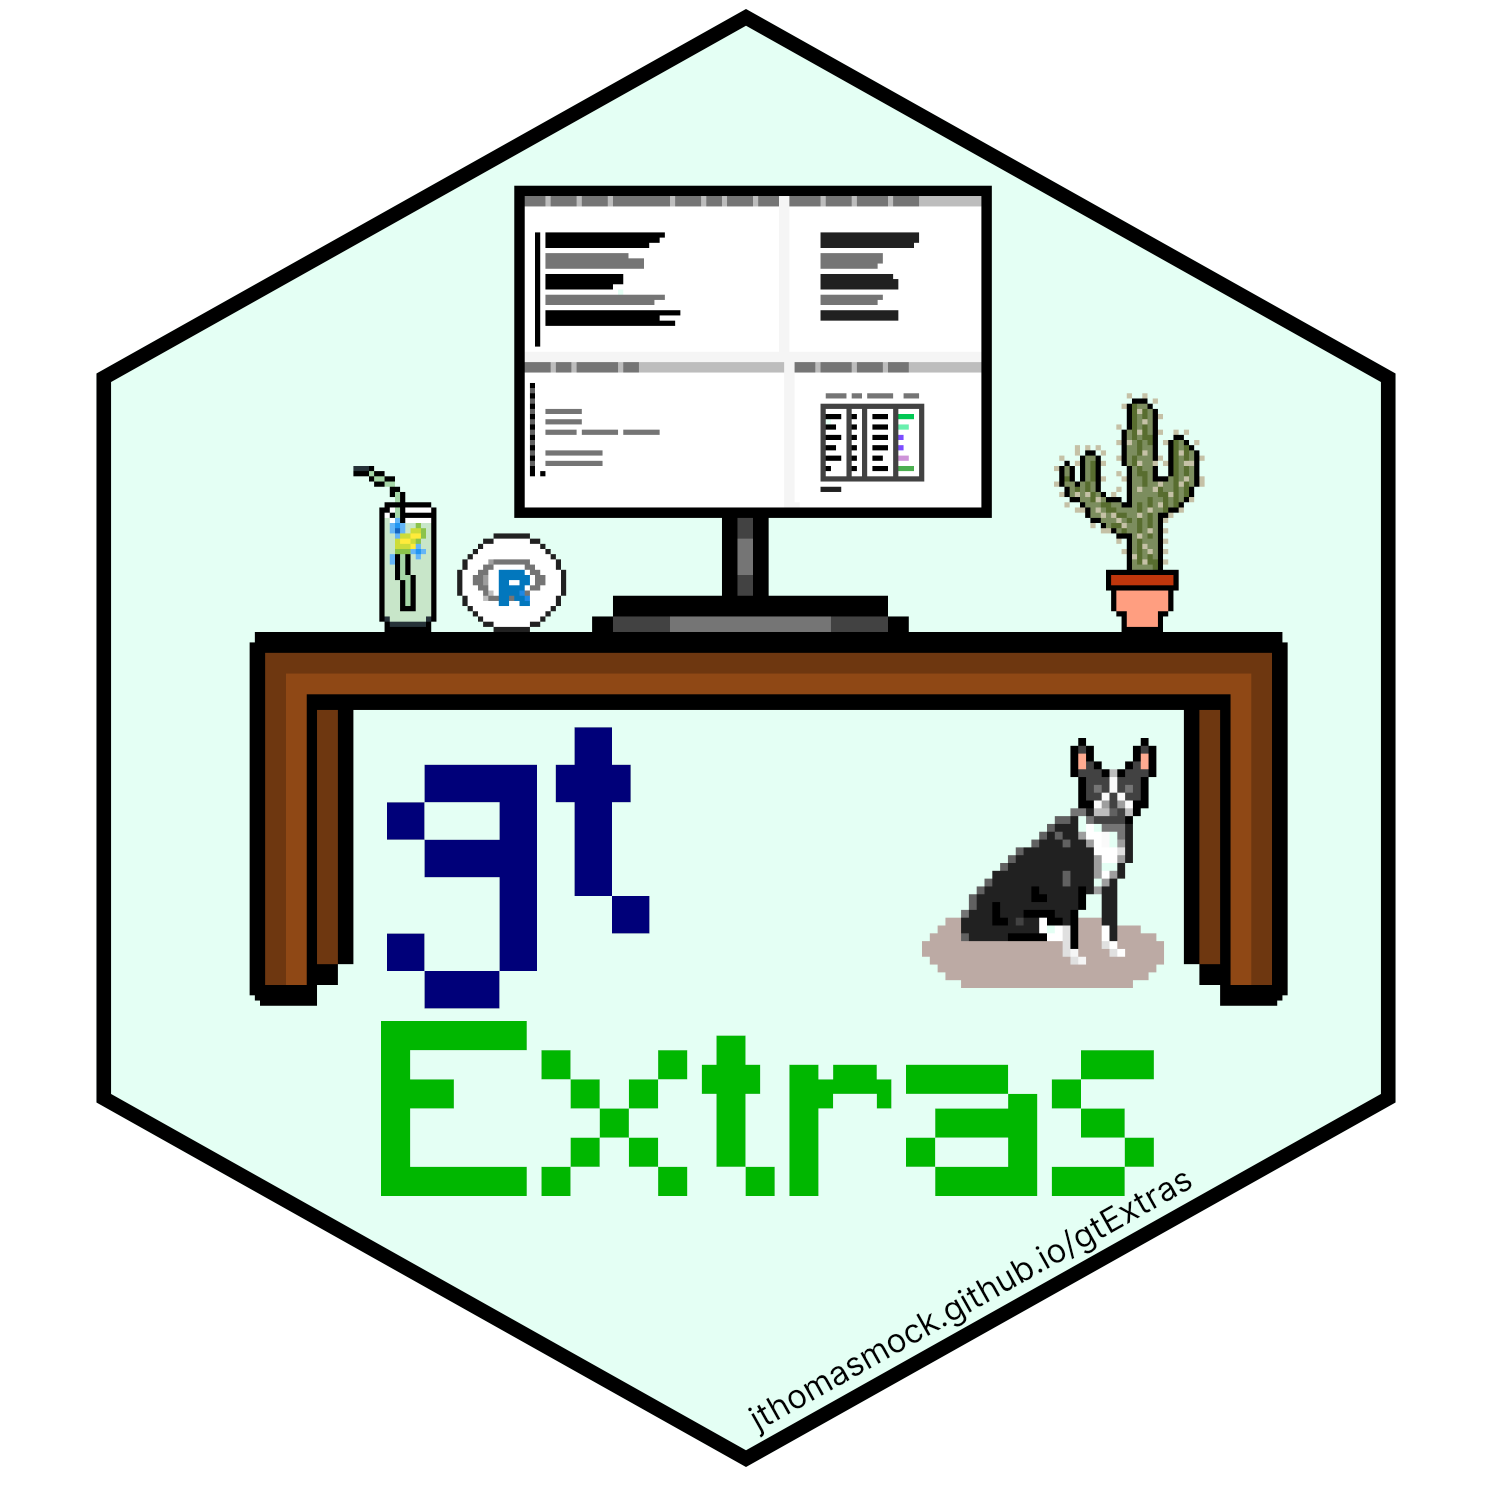 The hex logo for gtExtras, it is primarily a pixel-art inspired table with a computer, a gin and tonic cocktail, and a small cactus on top, below the desk is a small boston terrier.